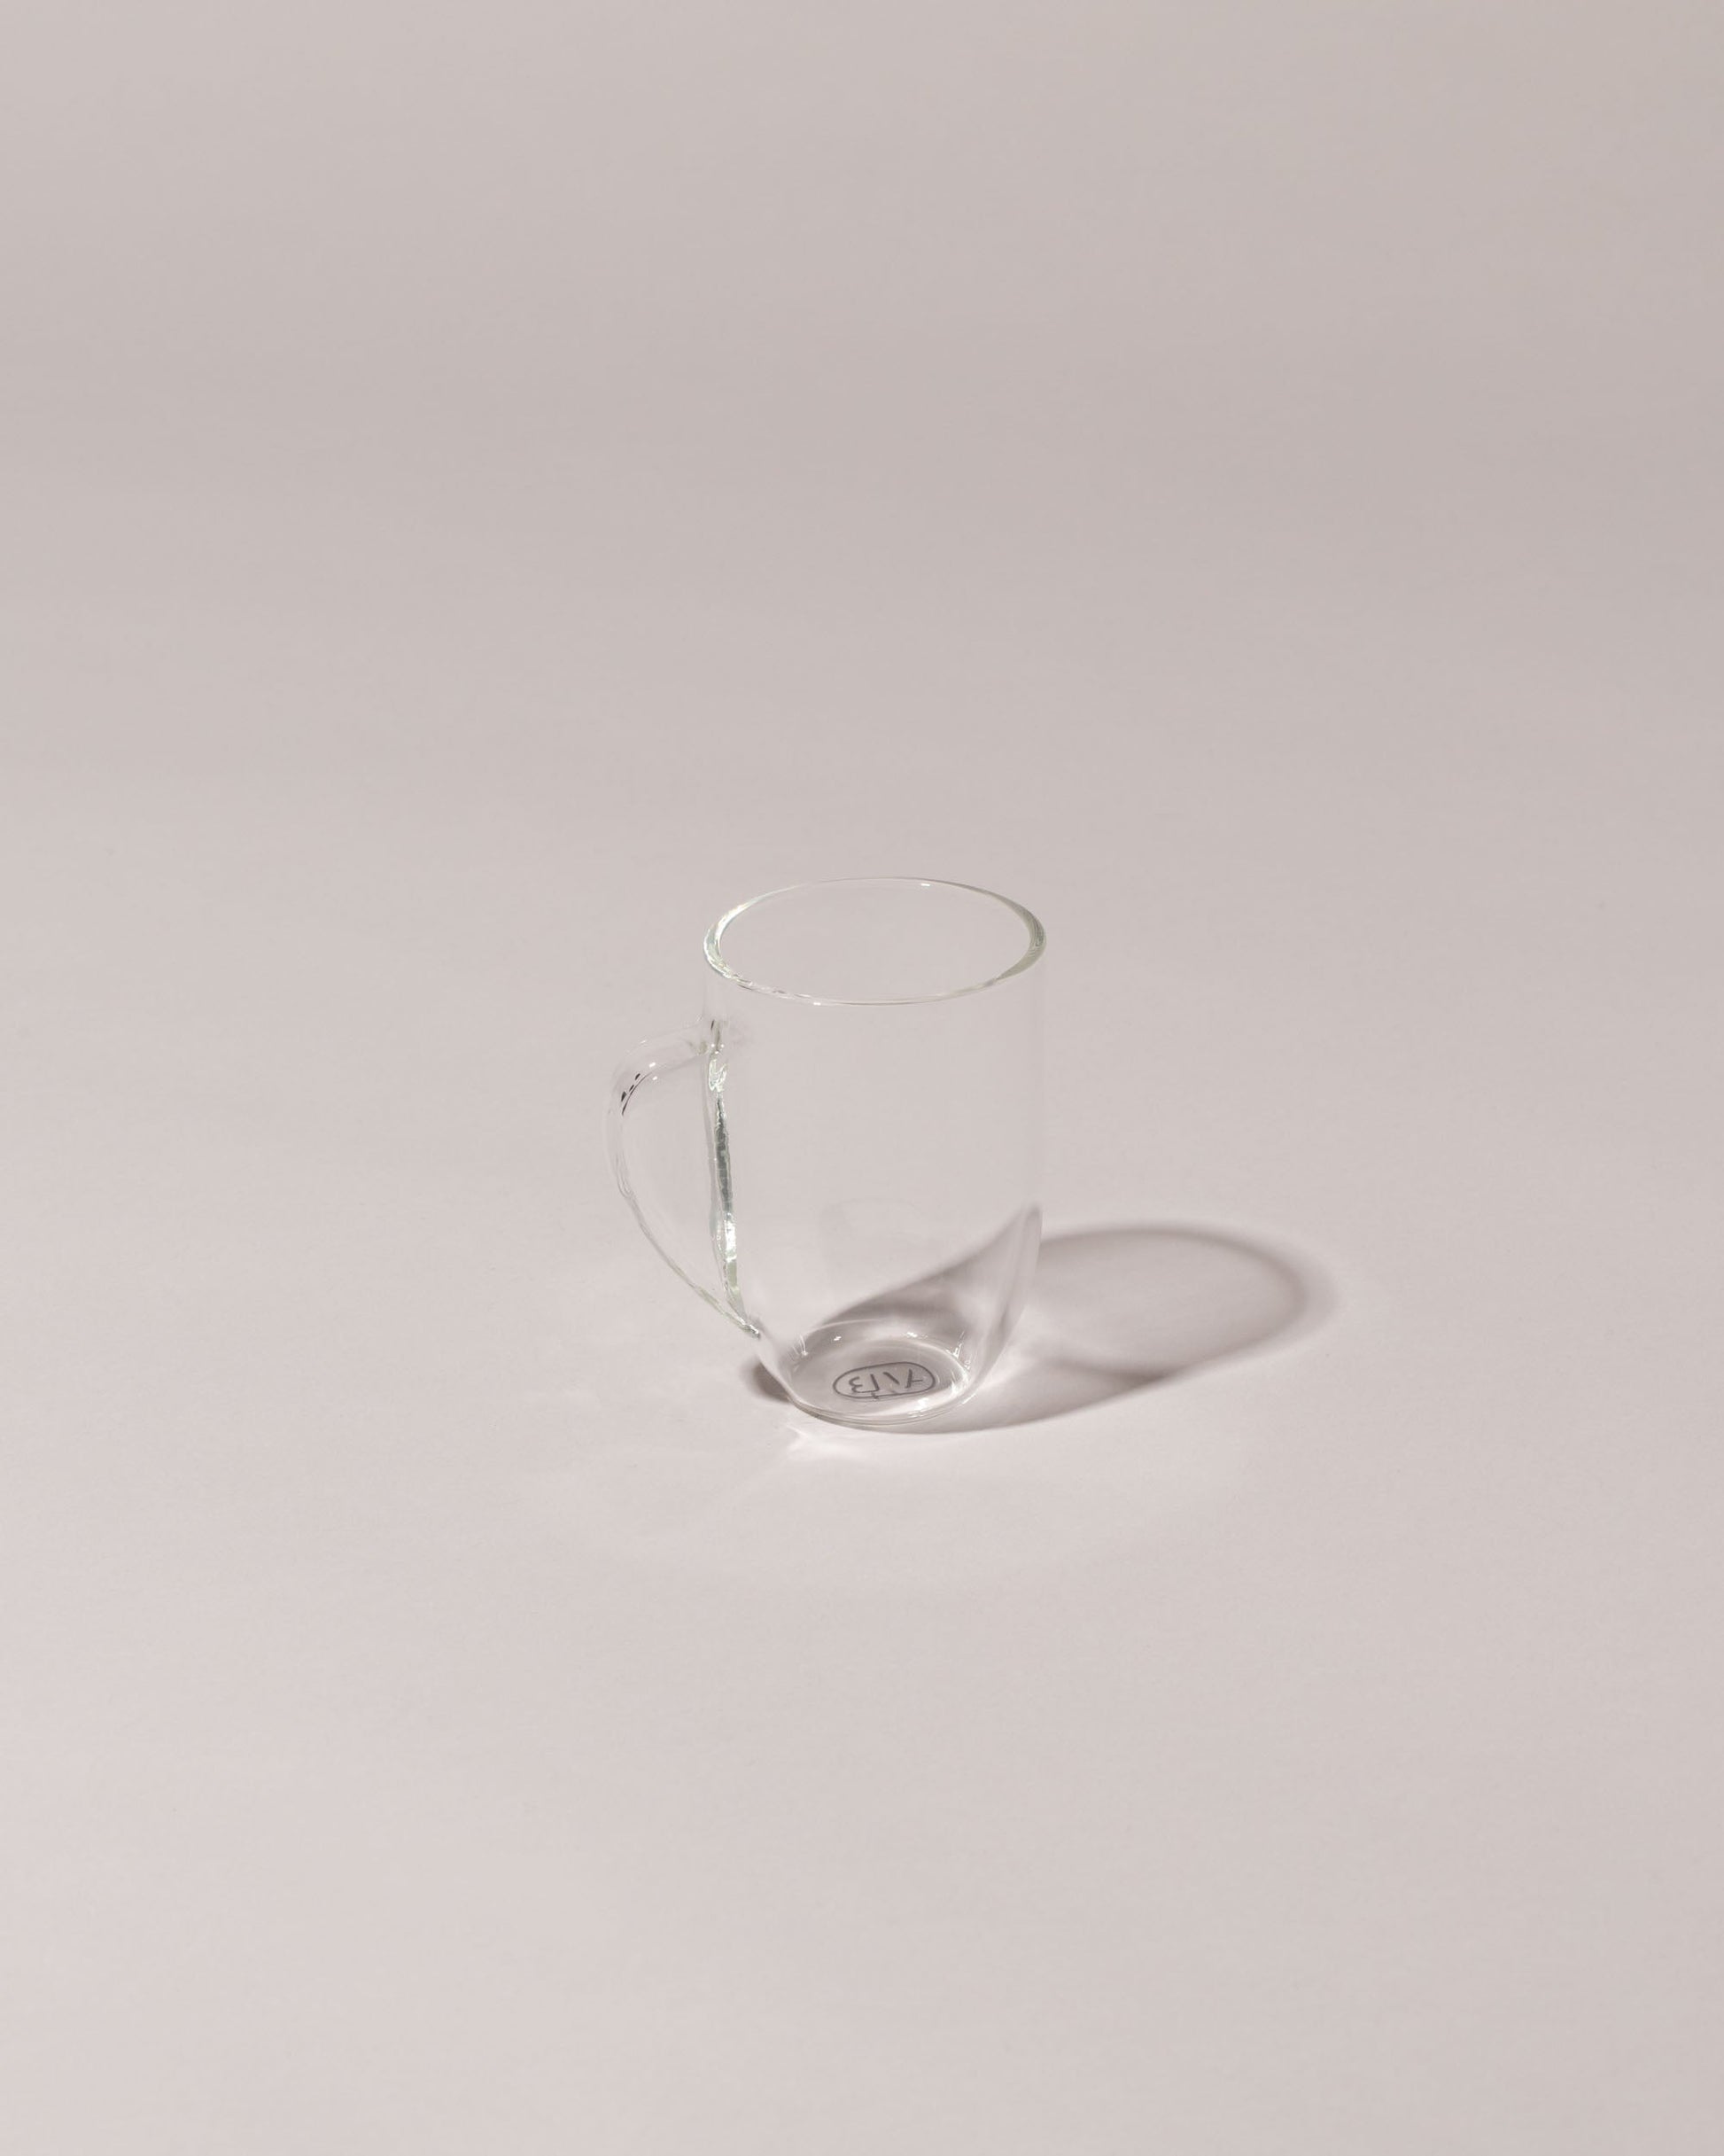 Laurence Brabant Glass Expansif Cup on light colored background.